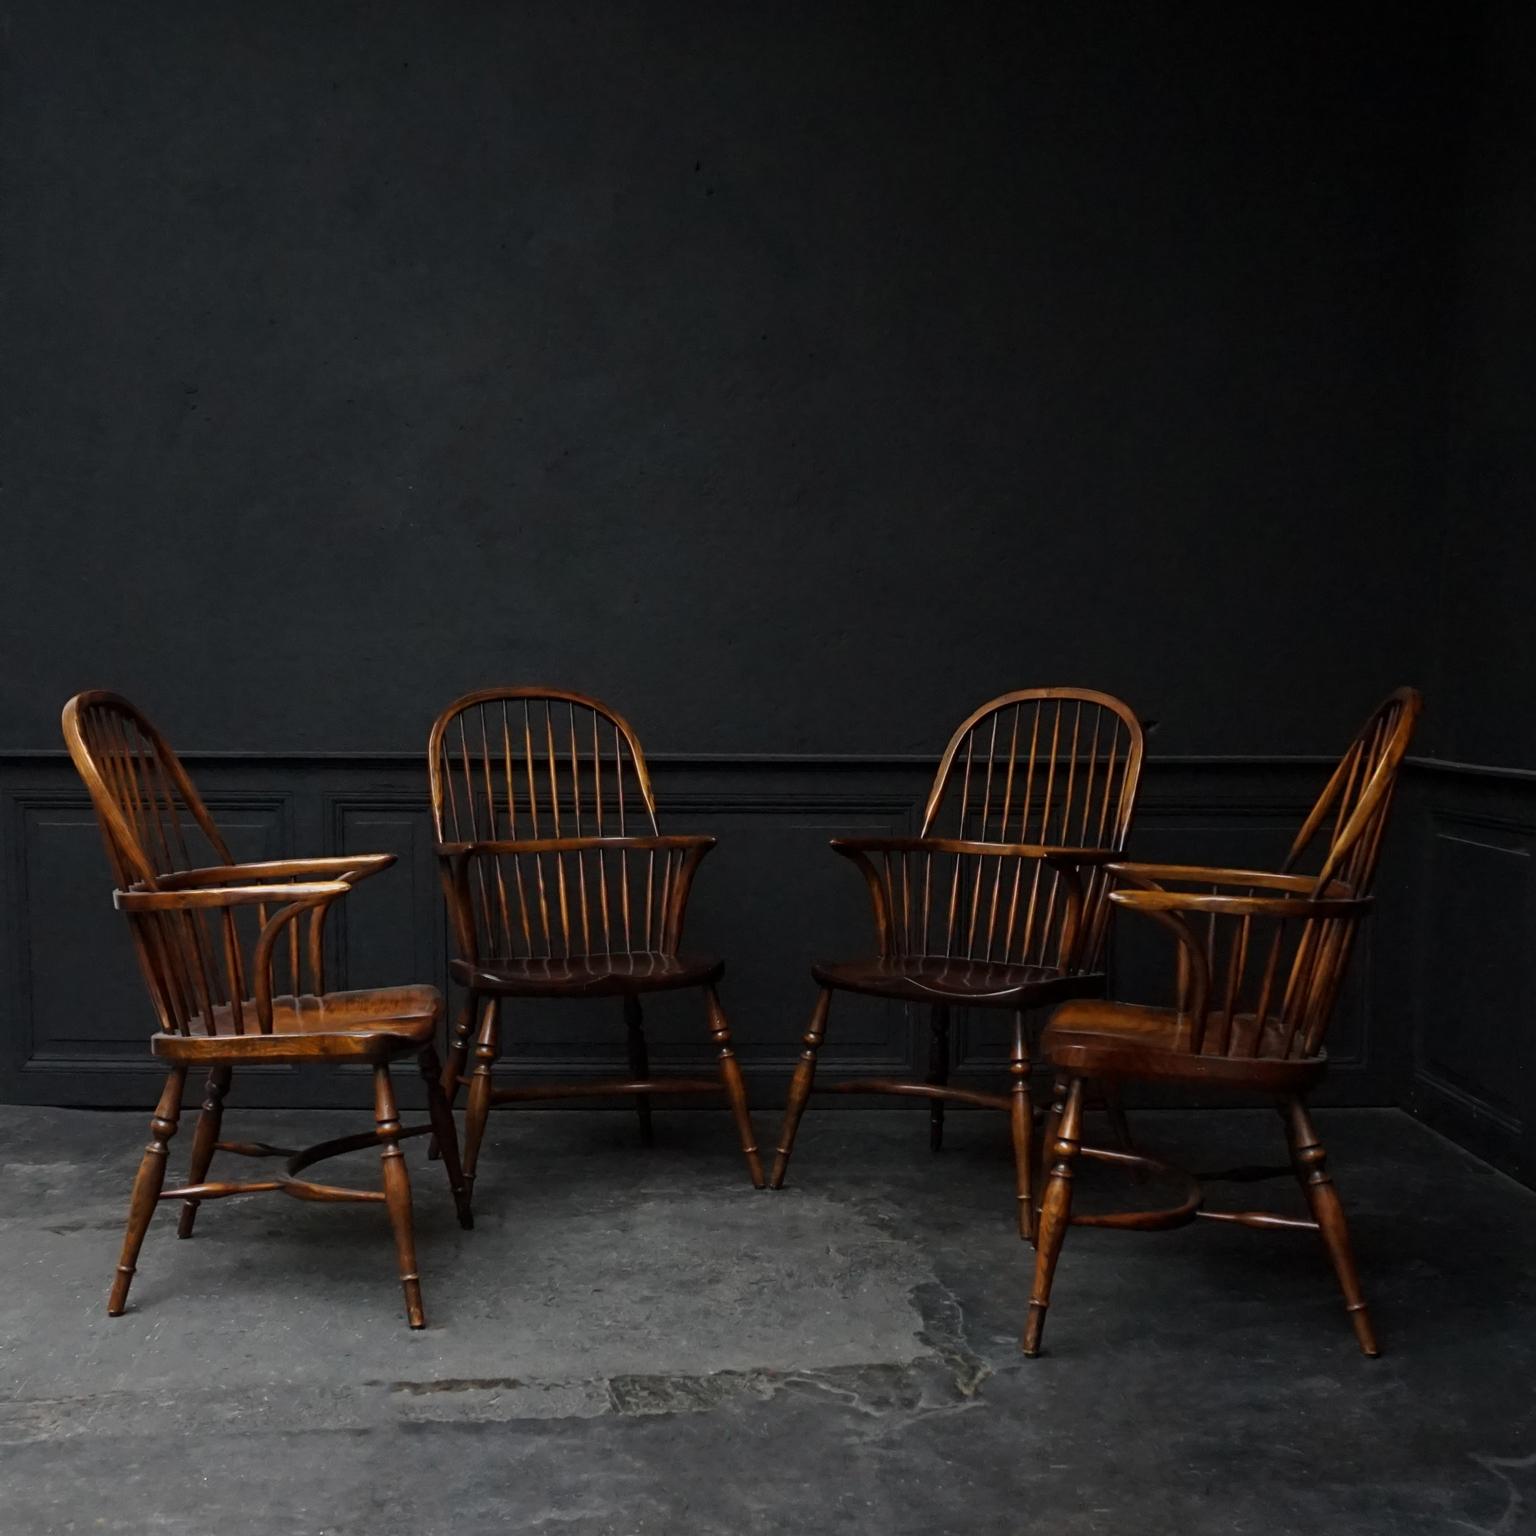 Set of four 19th century yew and elm wood Lincolnshire bow-back Windsor armchairs

The main period of Windsor chair production was the 19th century. However the design originated in the early 18th century when it is thought that Windsors were